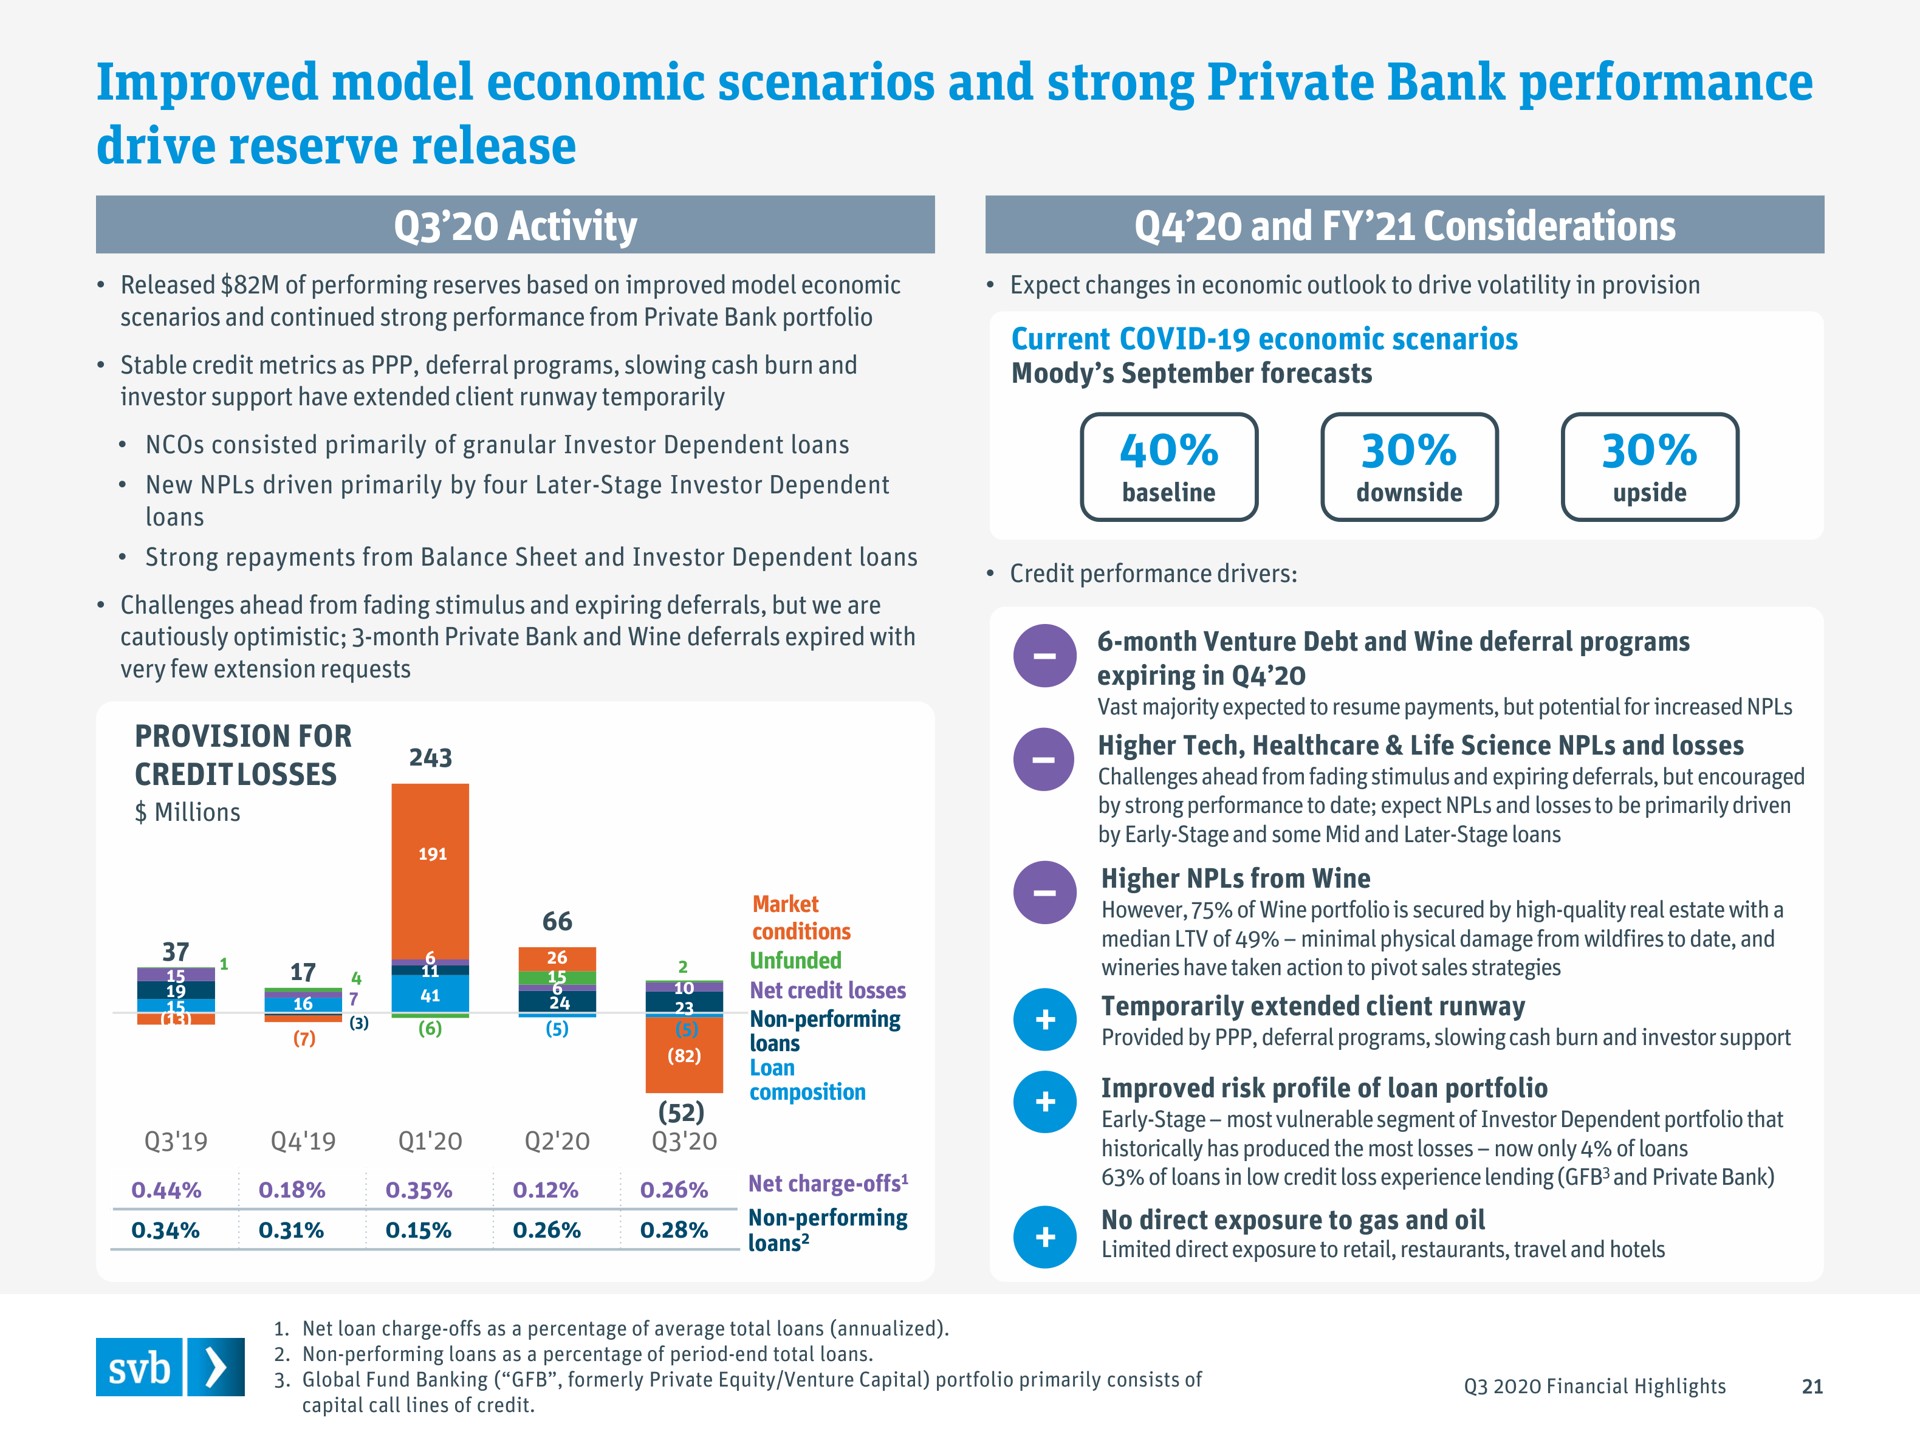 improved model economic scenarios and strong private bank performance drive reserve release | Silicon Valley Bank